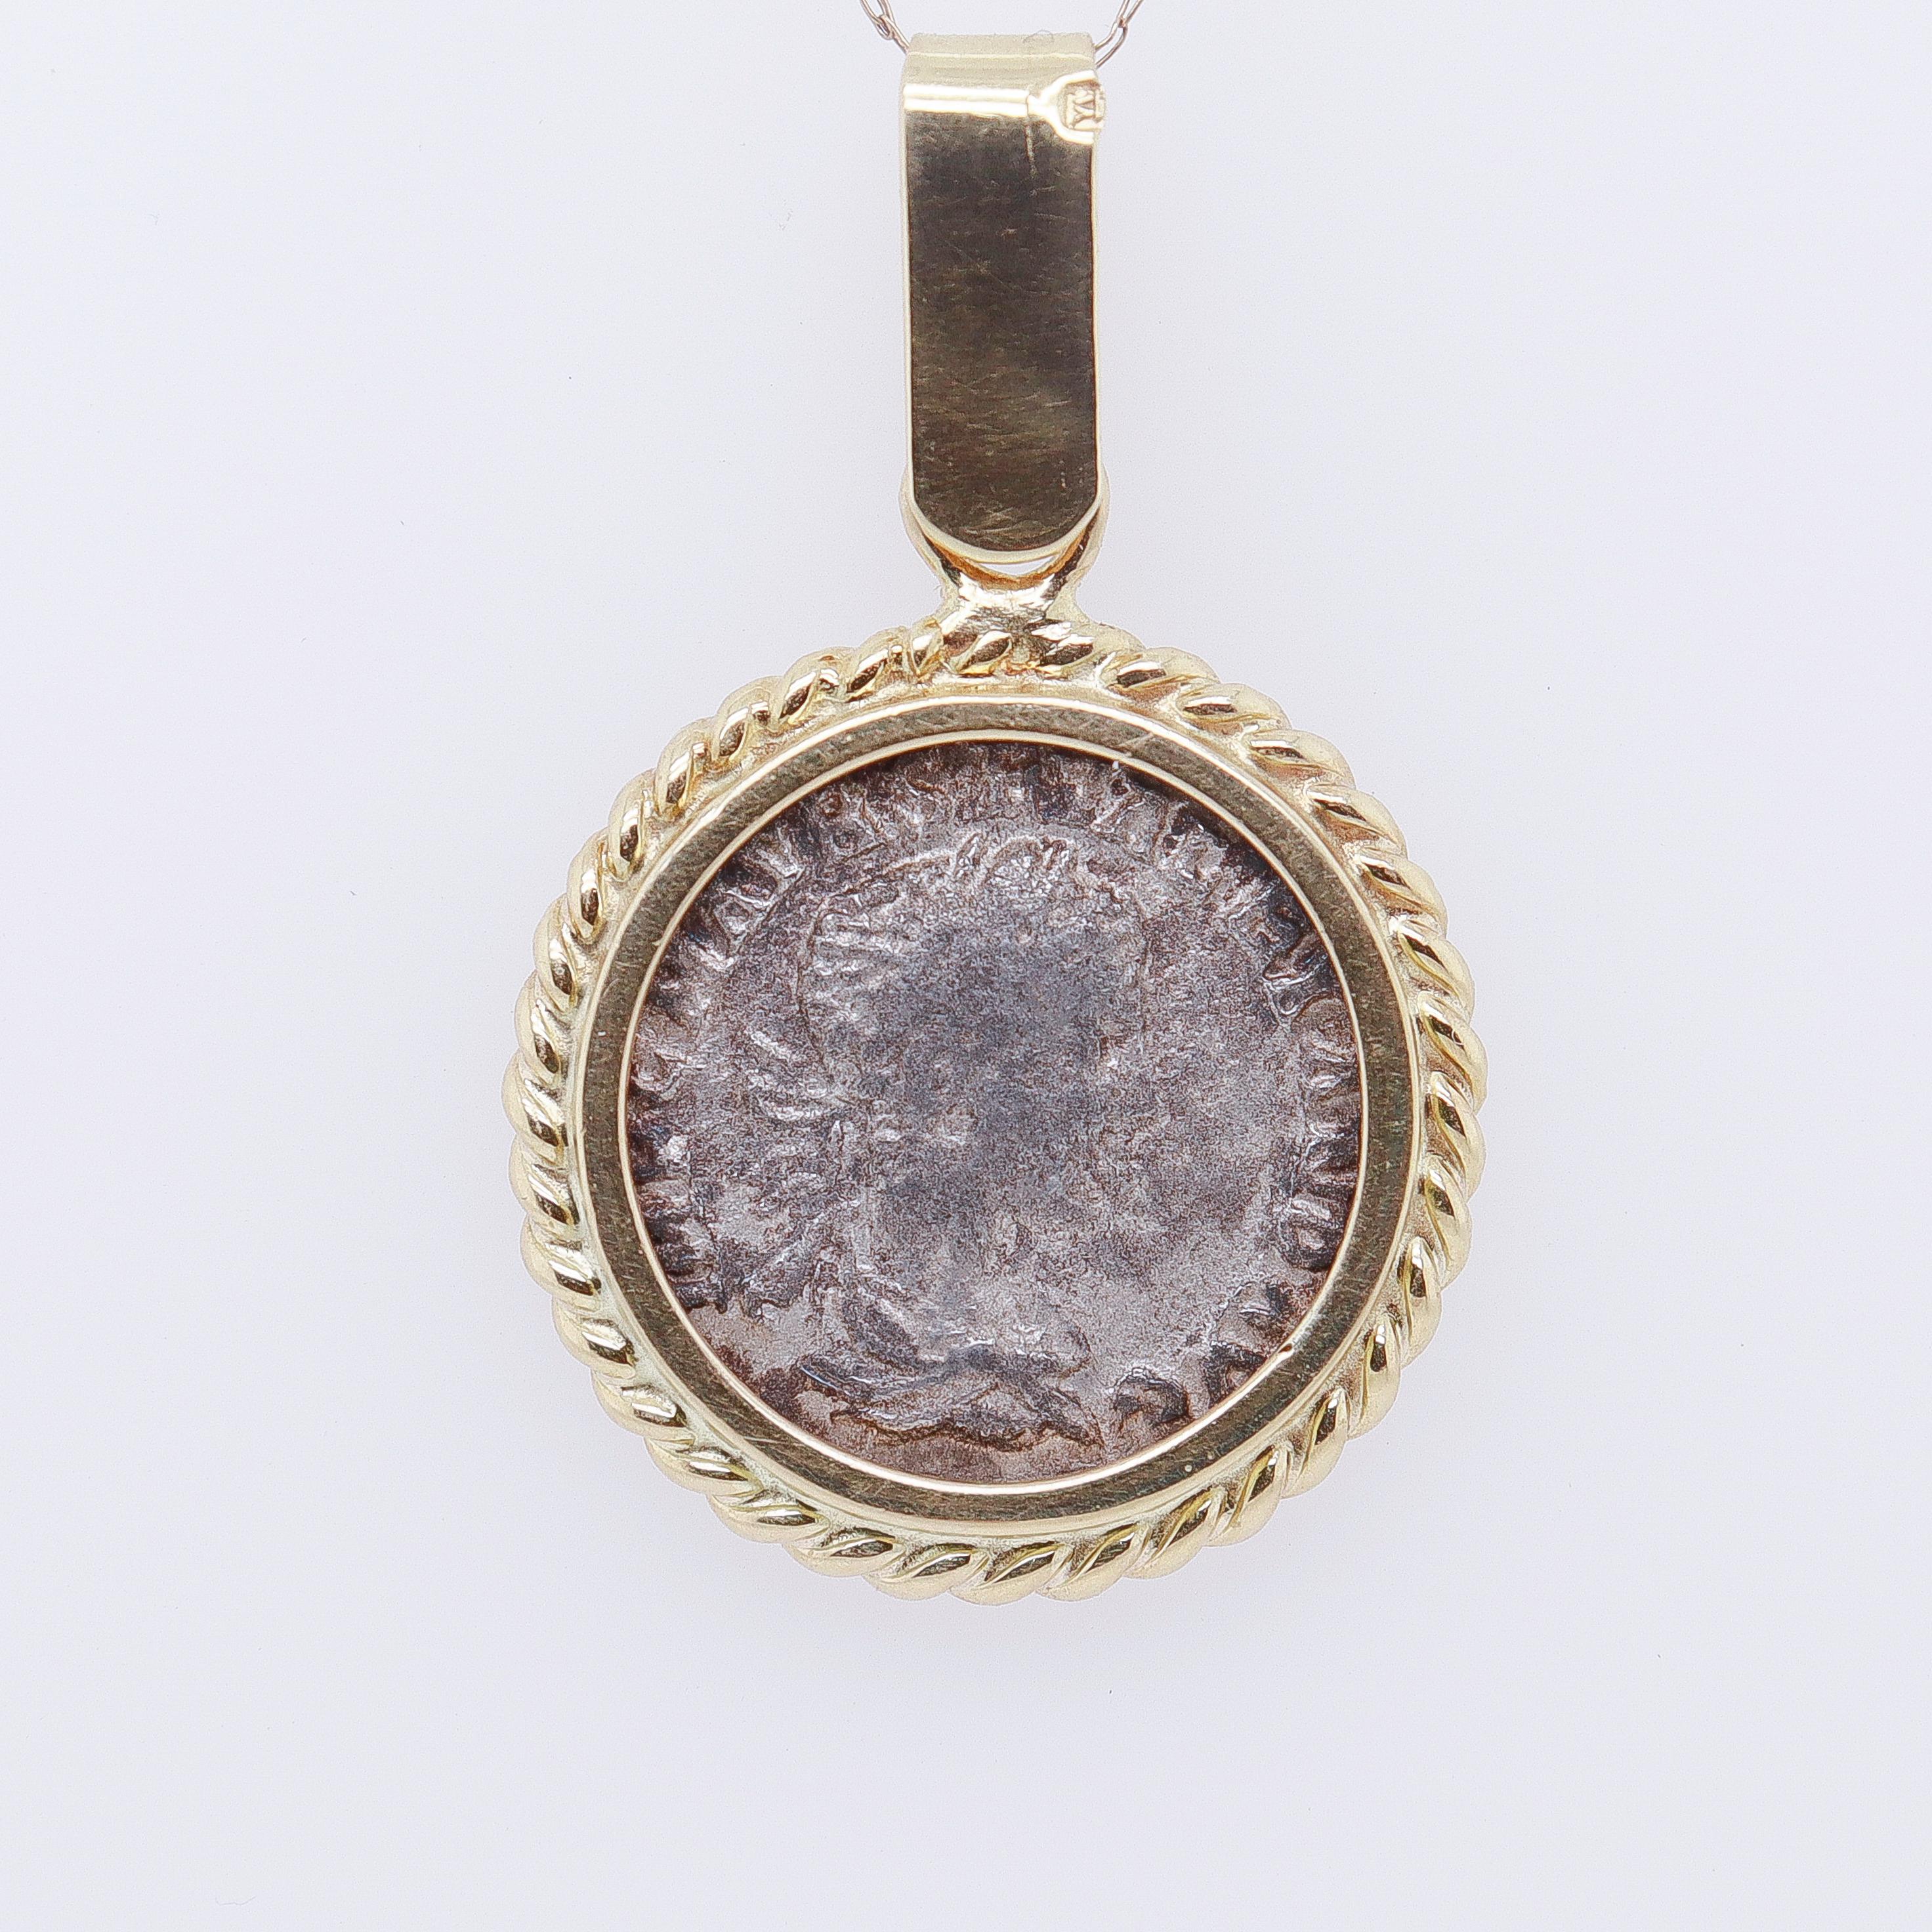 A fine ancient Roman coin pendant.

Set in 18k gold.

With rope twist bezel setting for the coin.

The coin is a silver Severus Alexander denarius (ca. 222 CE). 

With young Severus' face to the obverse. The reverse bears a seated Salus, the Roman